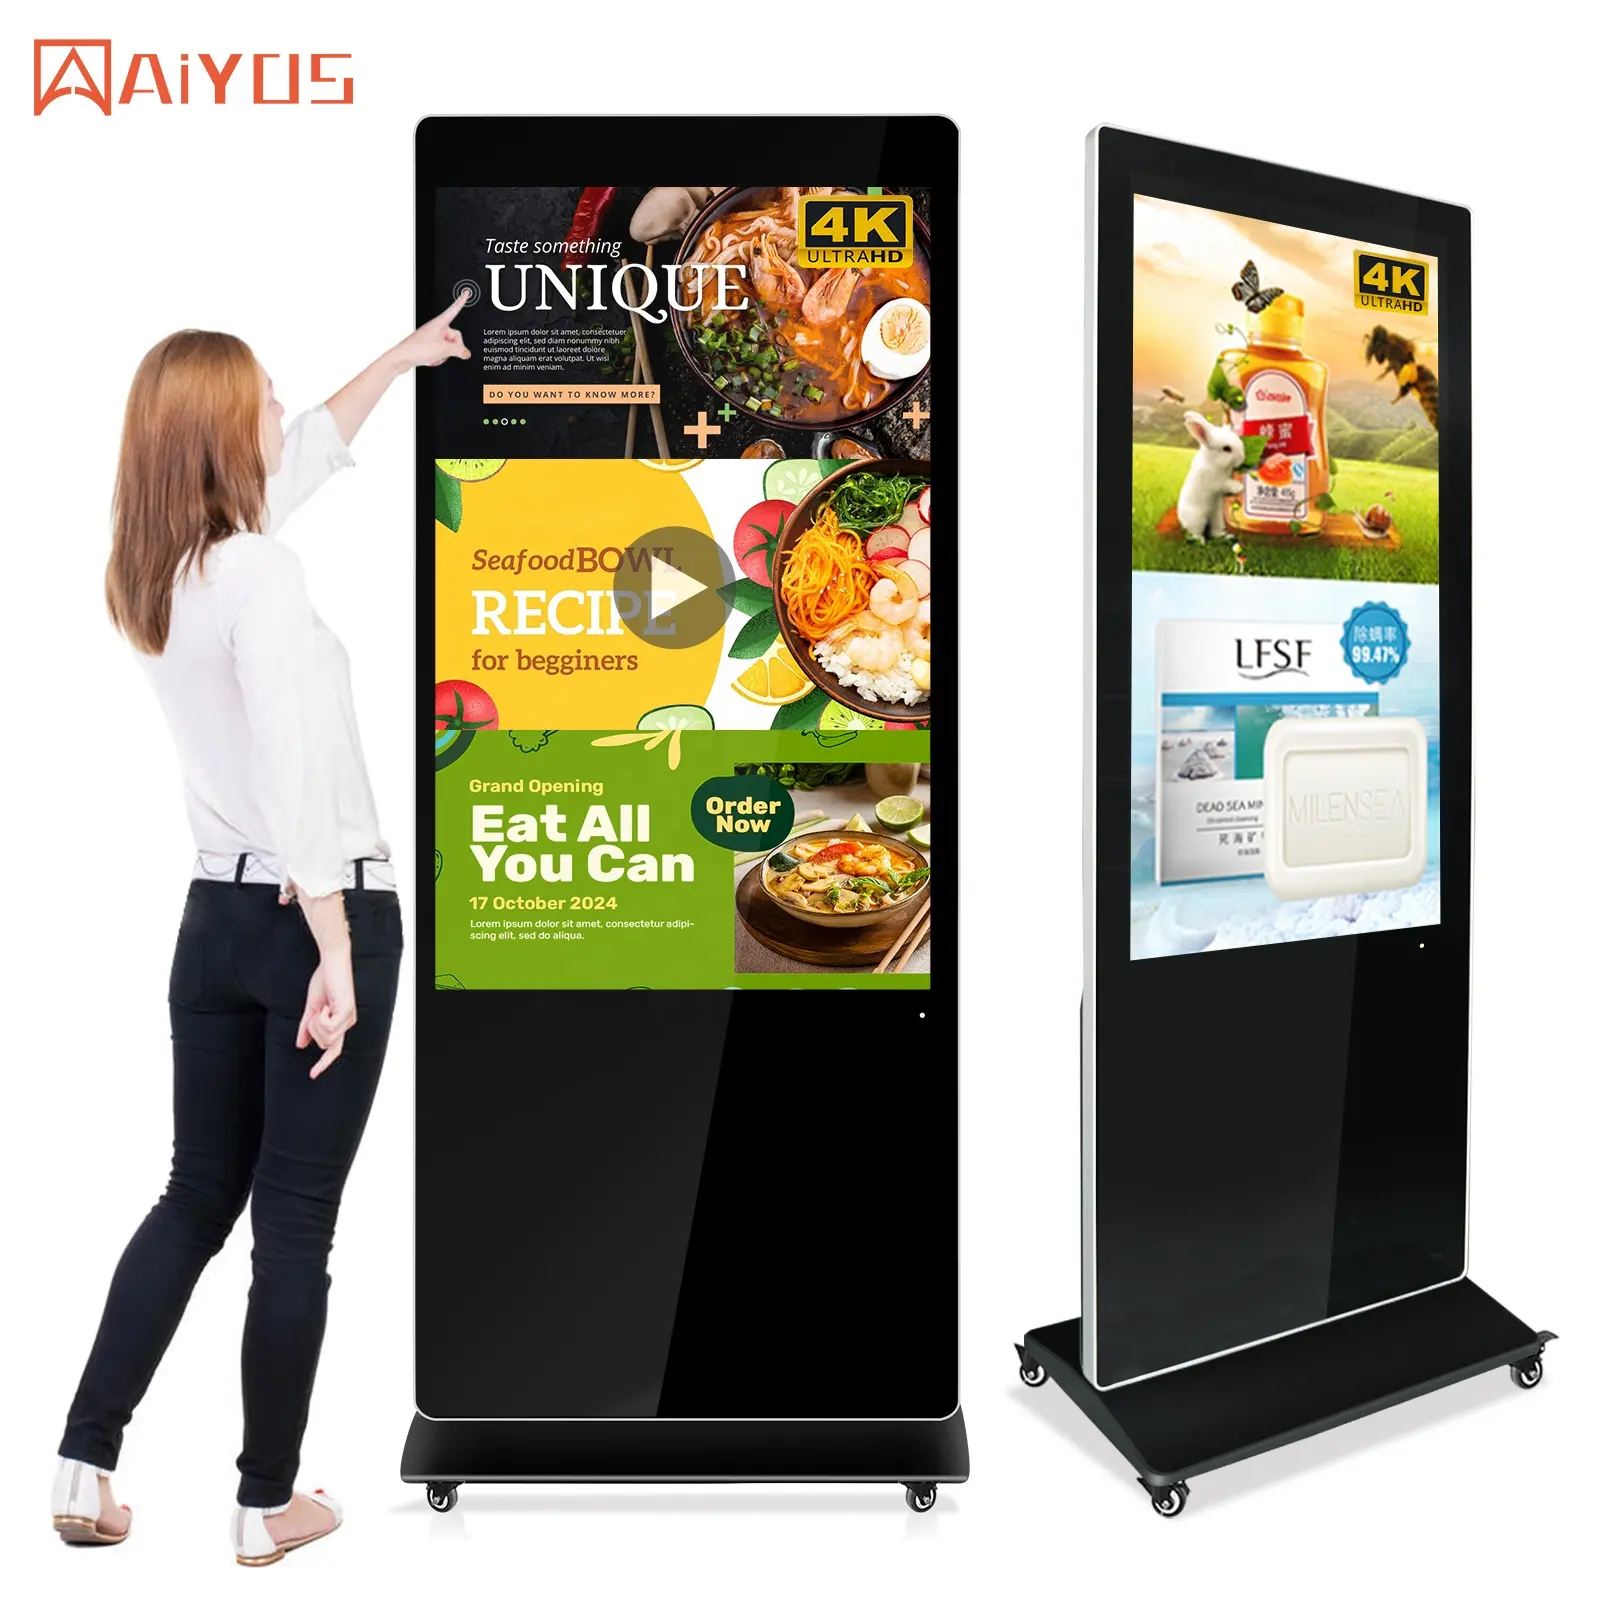 Indoor 55inch Touch Screen 4K company web browse interactive Kiosk/Totem LCD advertising display include Chrome Play store